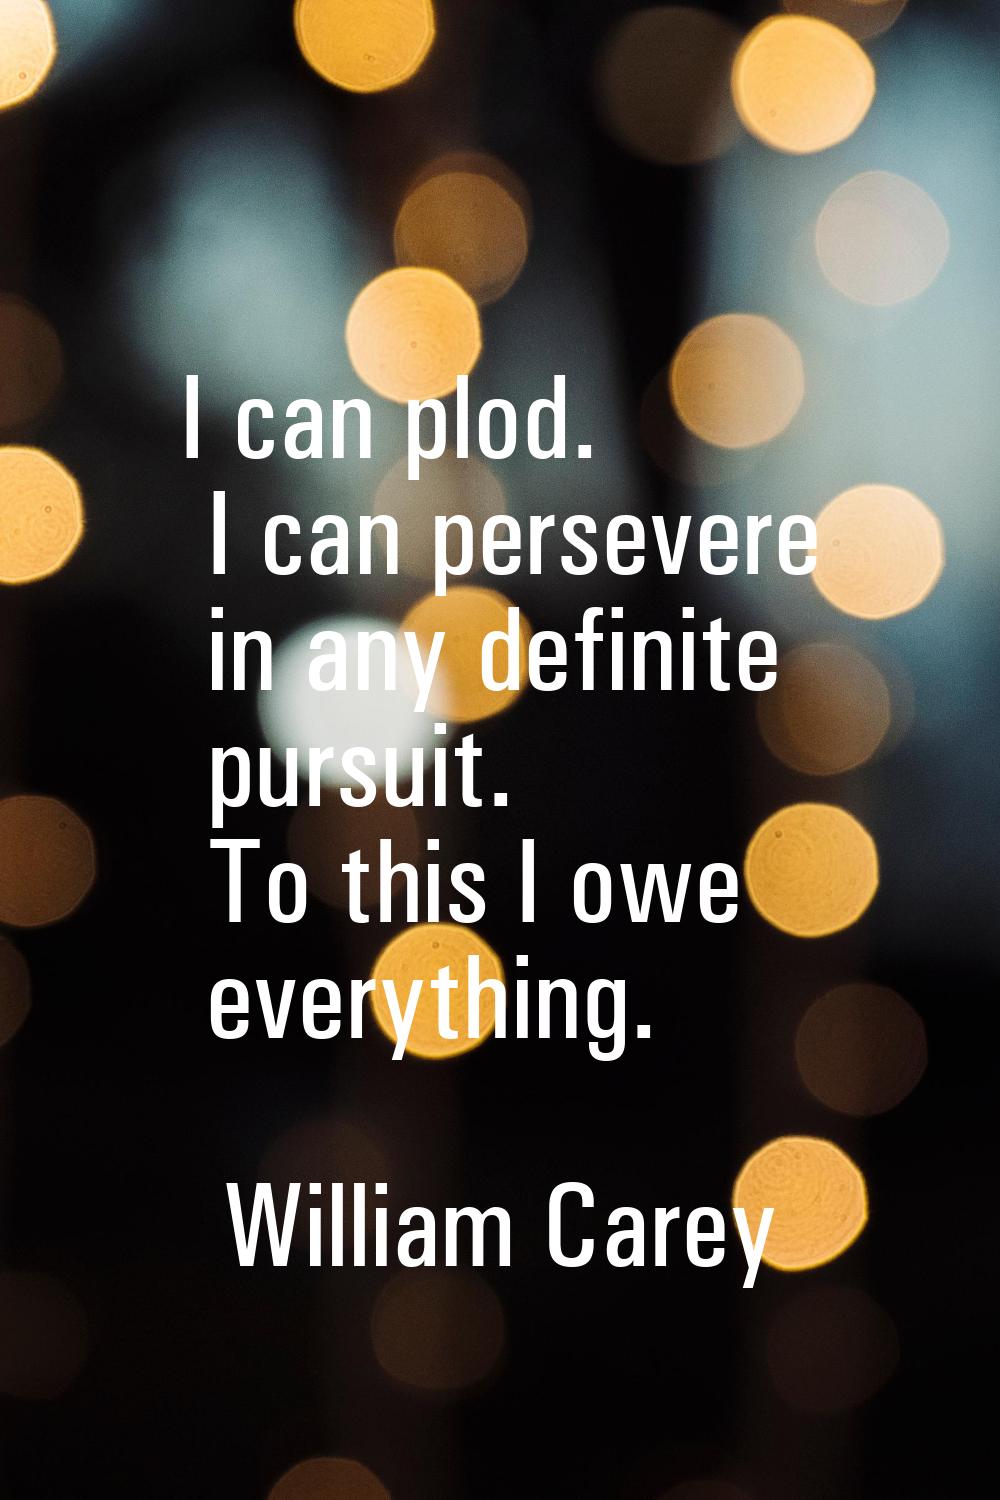 I can plod. I can persevere in any definite pursuit. To this I owe everything.